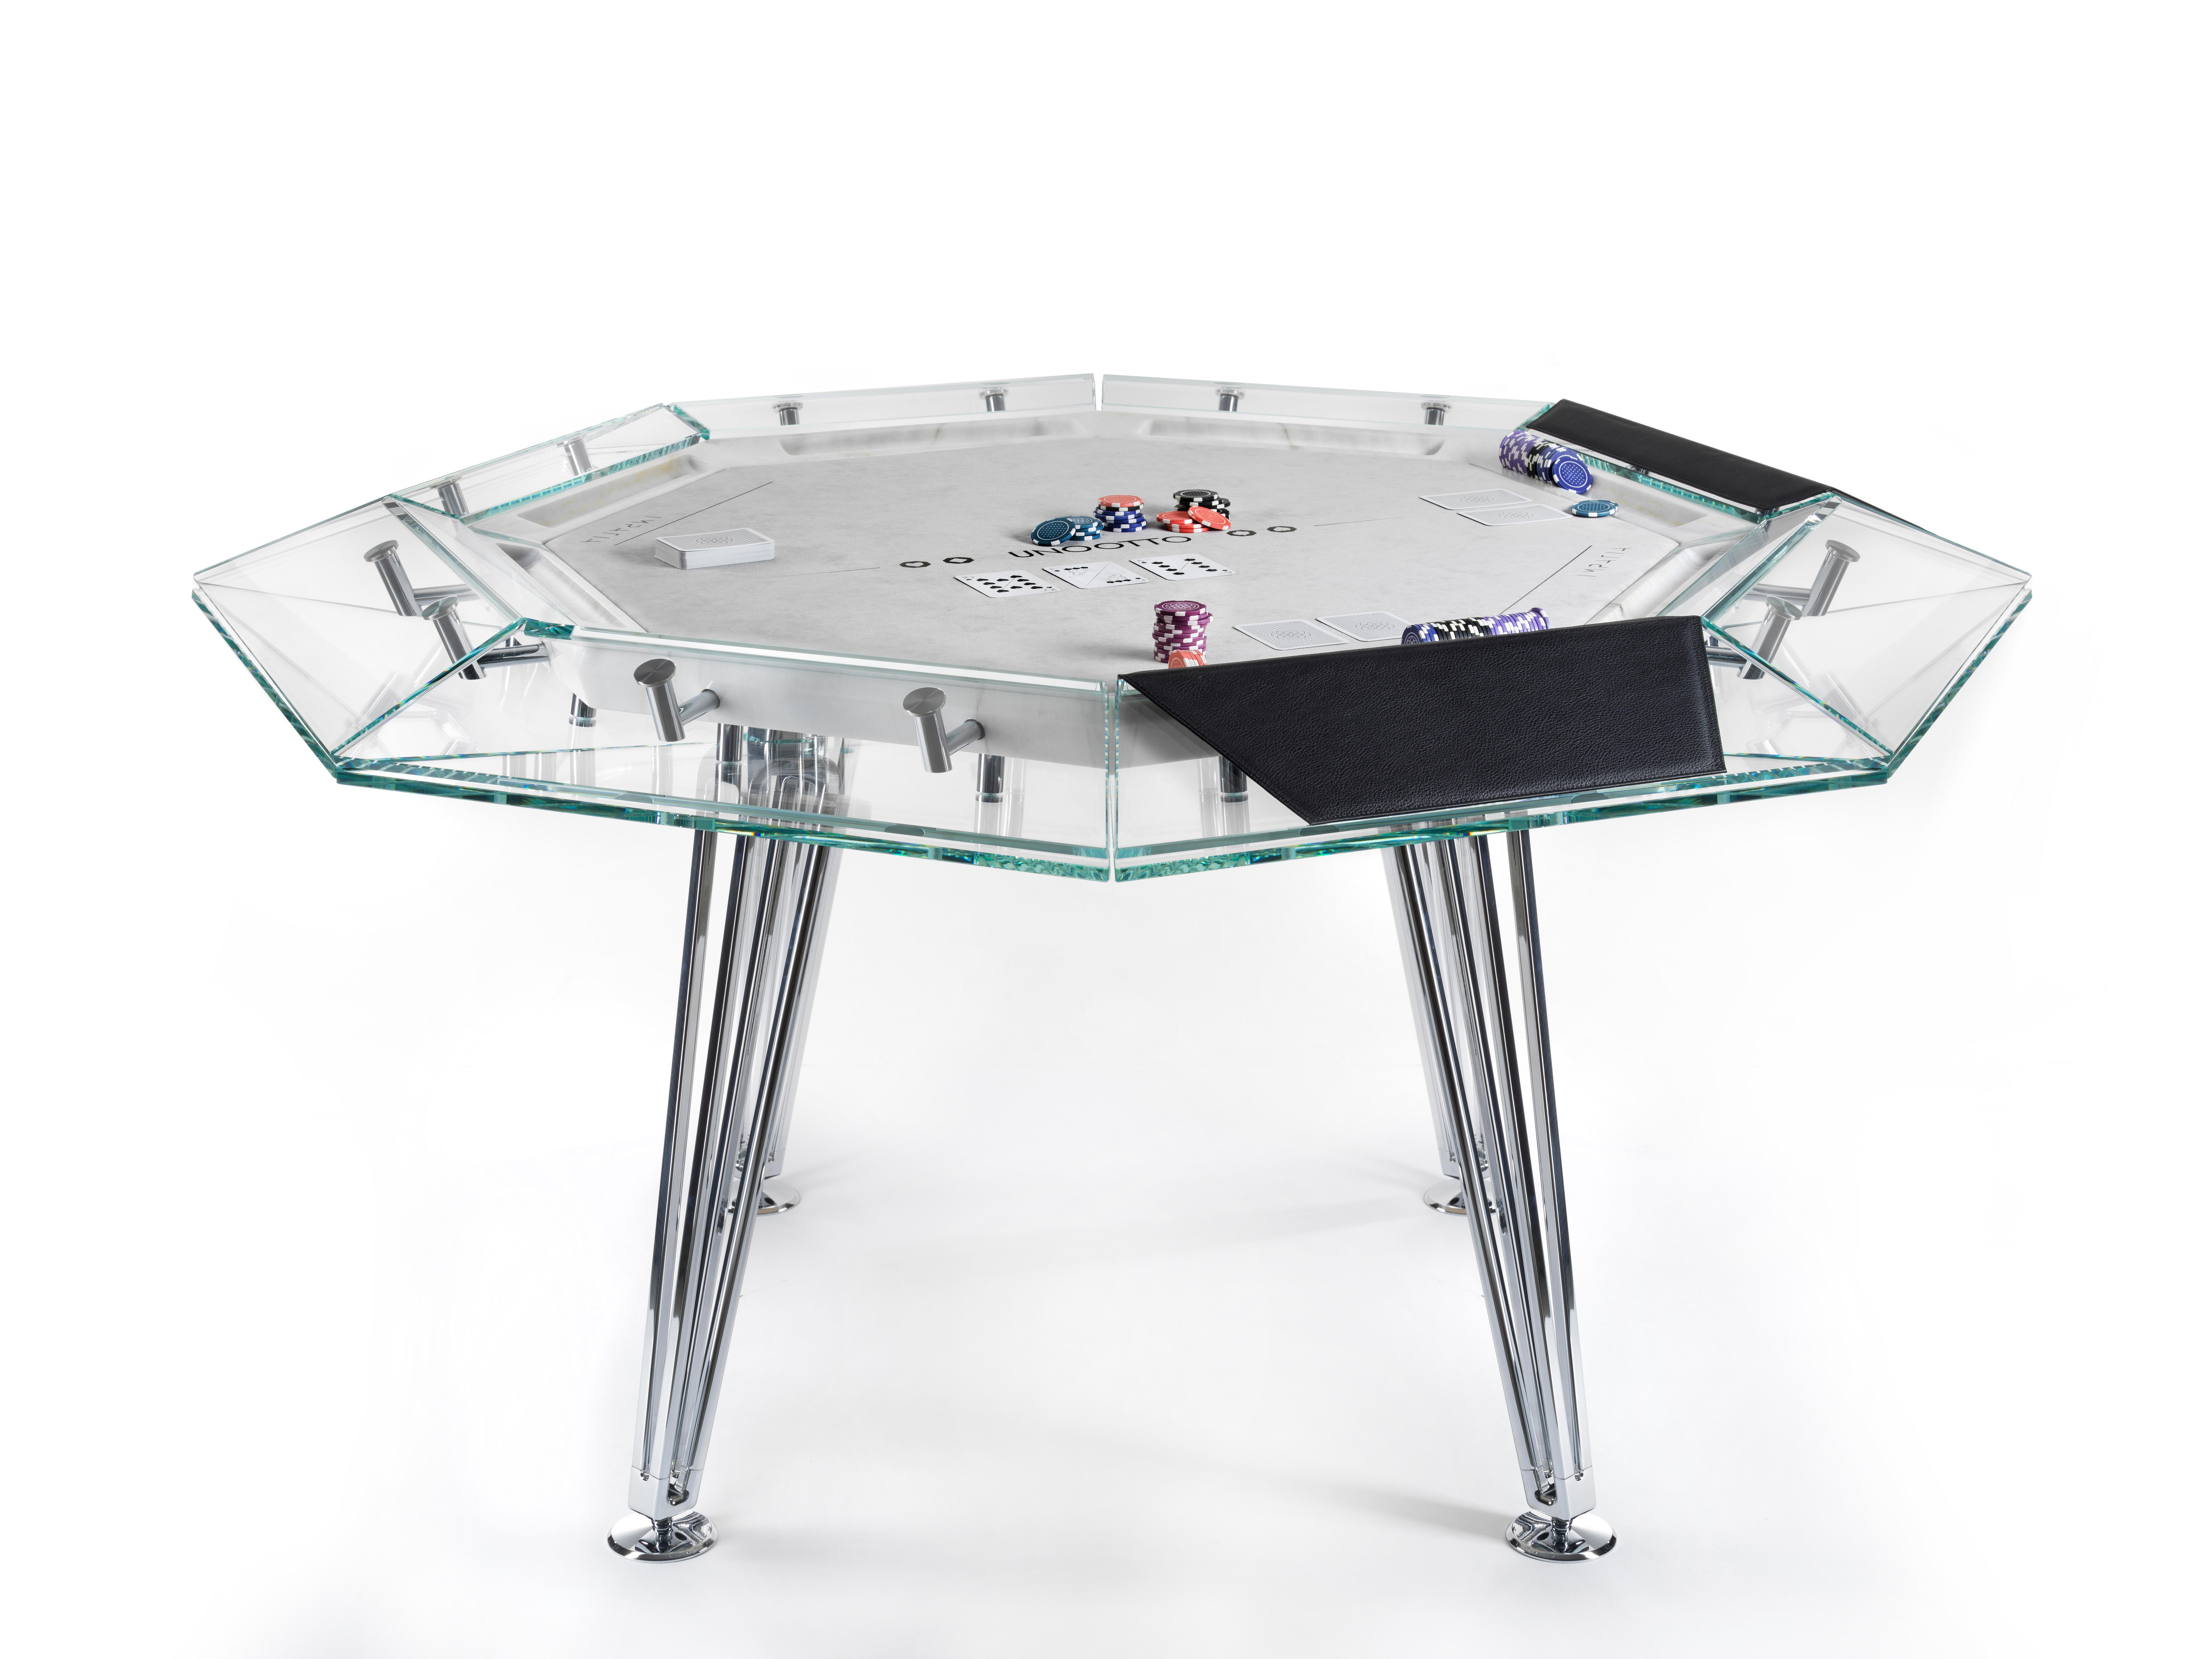 Modern Unootto Marble Edition, 8 Player Poker Table, by Impatia